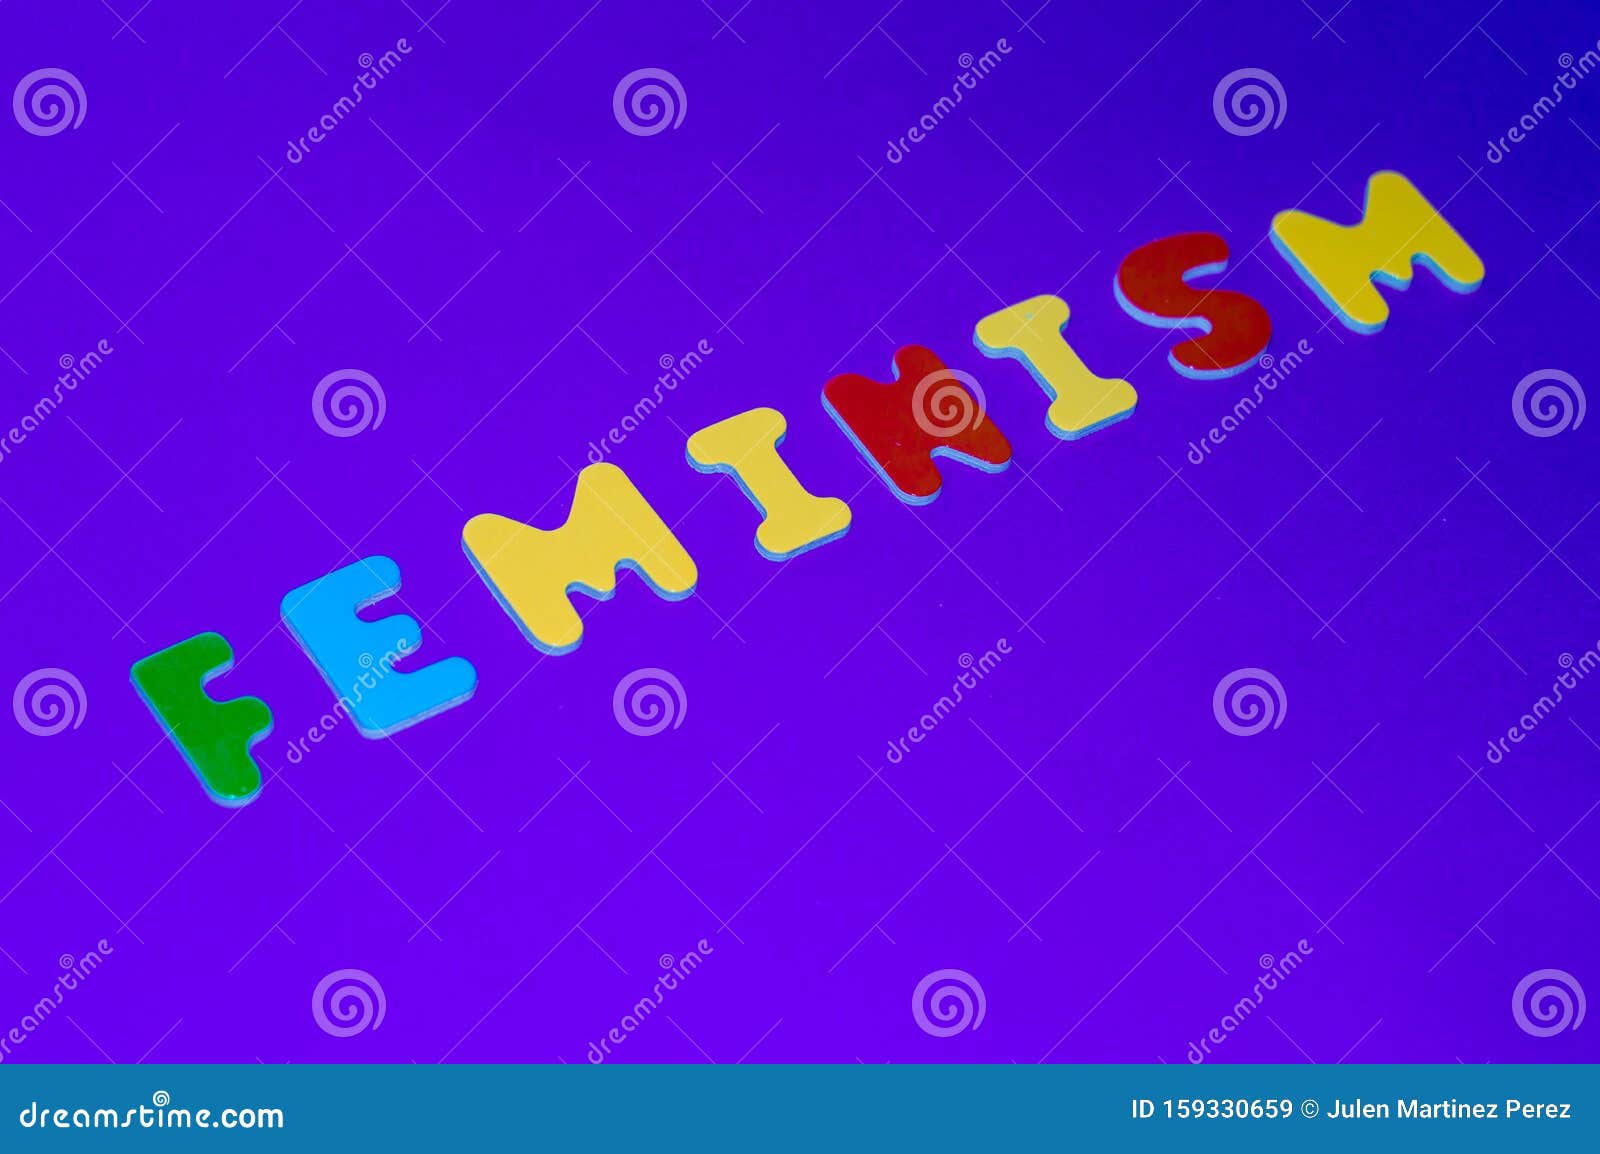 vindicating message of feminism made with letters